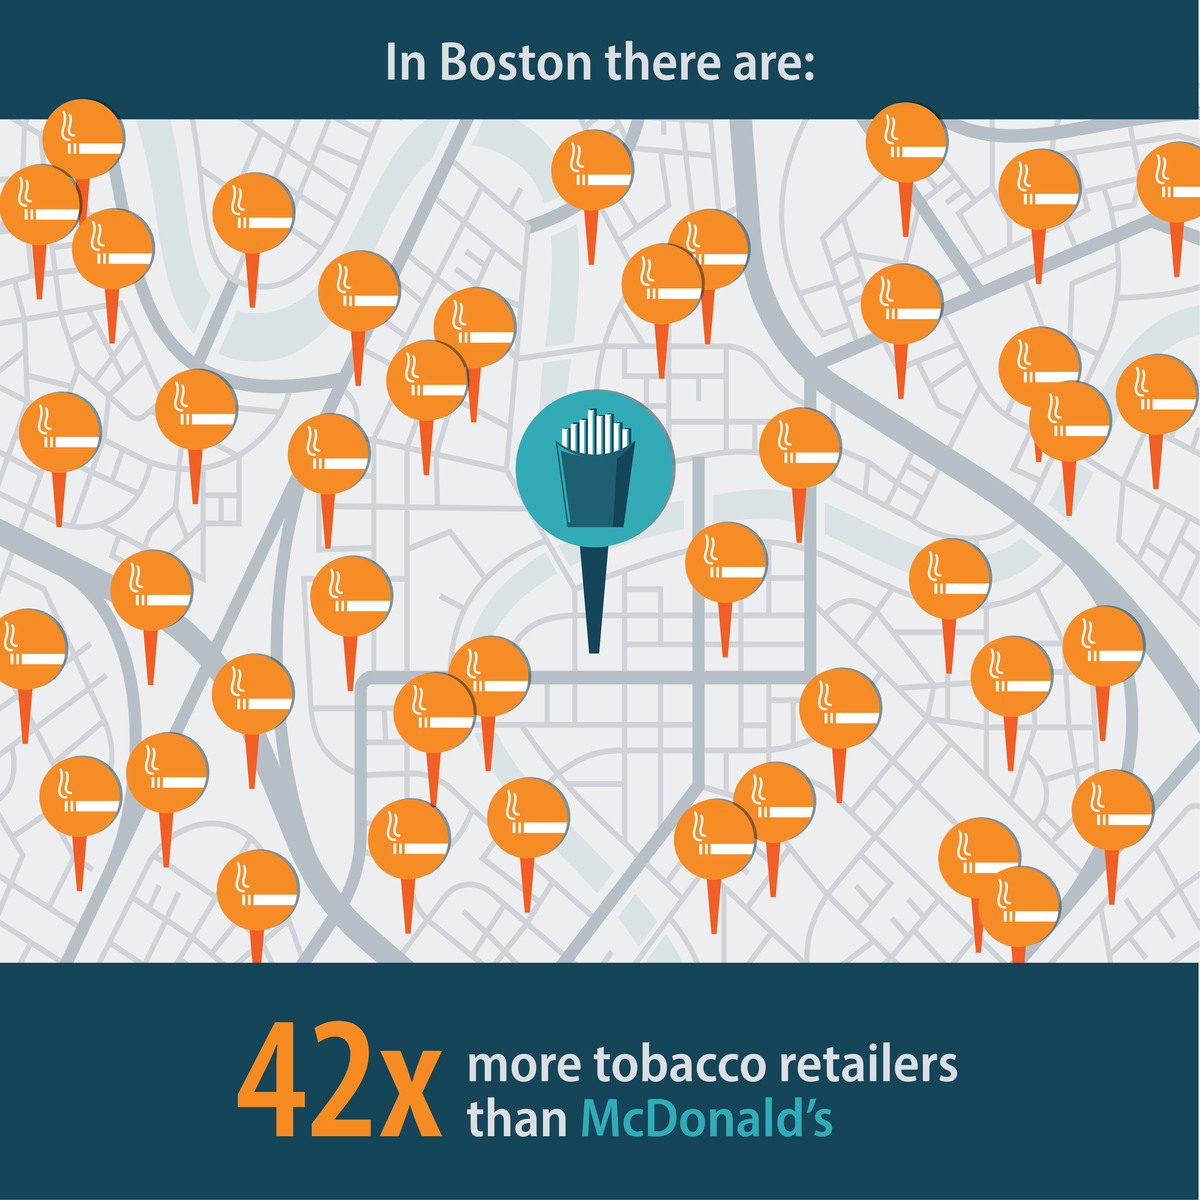 In Boston there are: 42 times more tobacco retailers than McDonald's